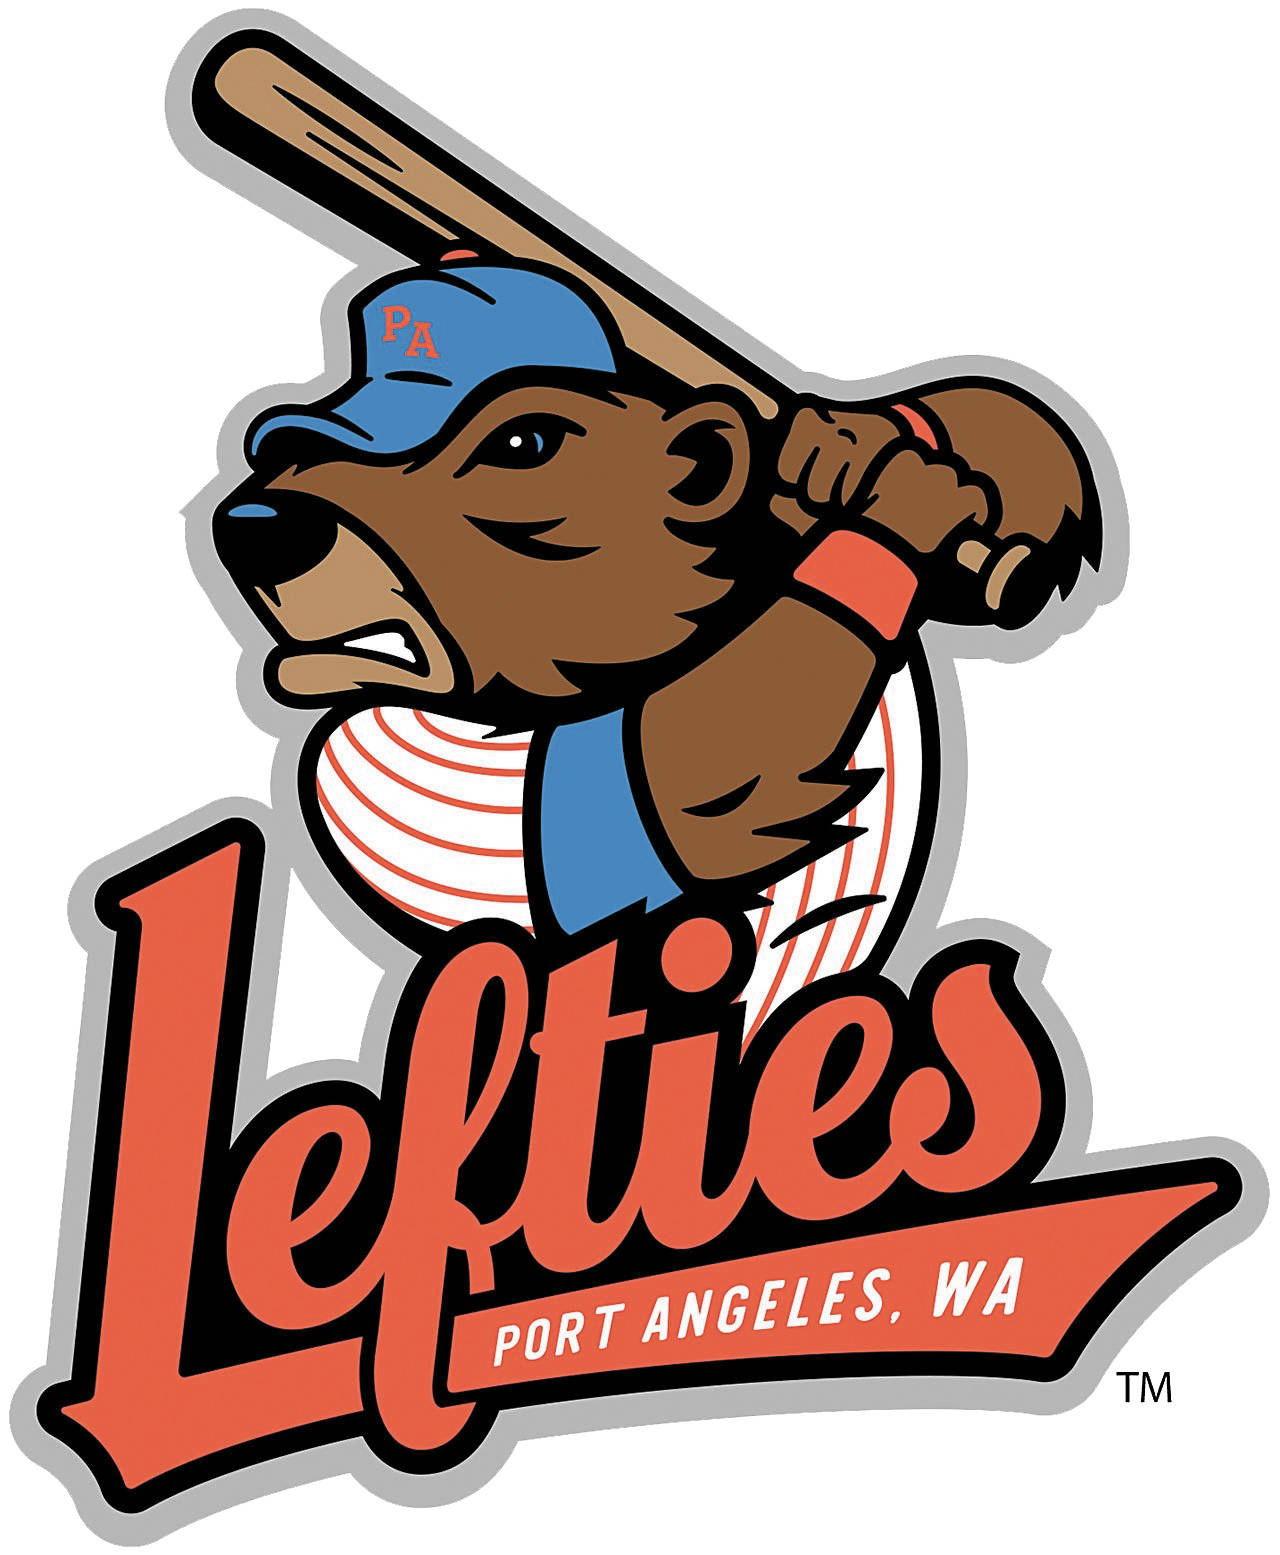 BASEBALL: A glance at the Lefties’ West Coast League opponents